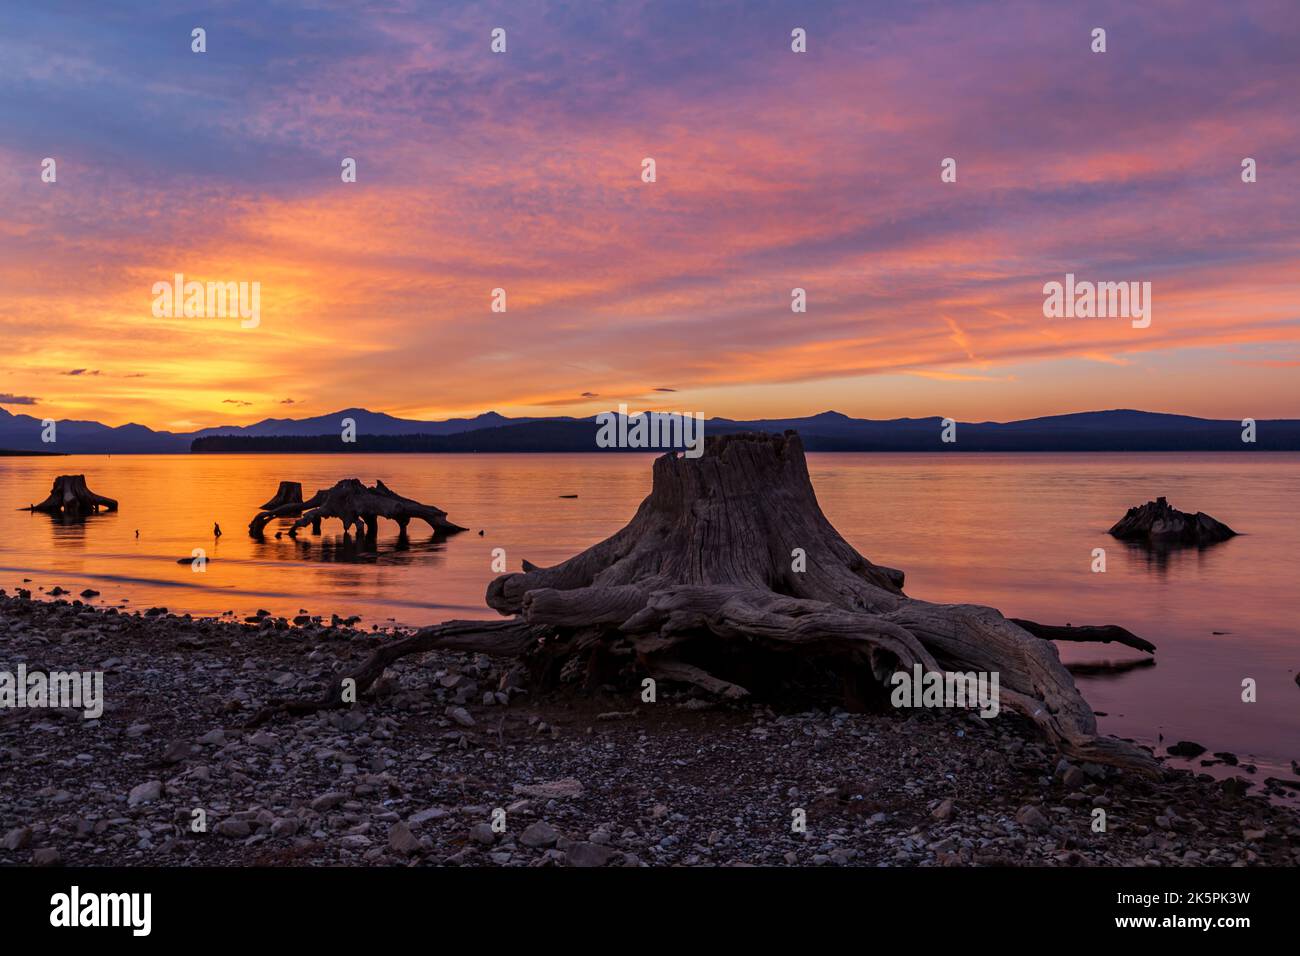 Drought exposes the tap root and trunk of a long ago submerged trees in the low waters of Lake Almanor in Northern California. Stock Photo